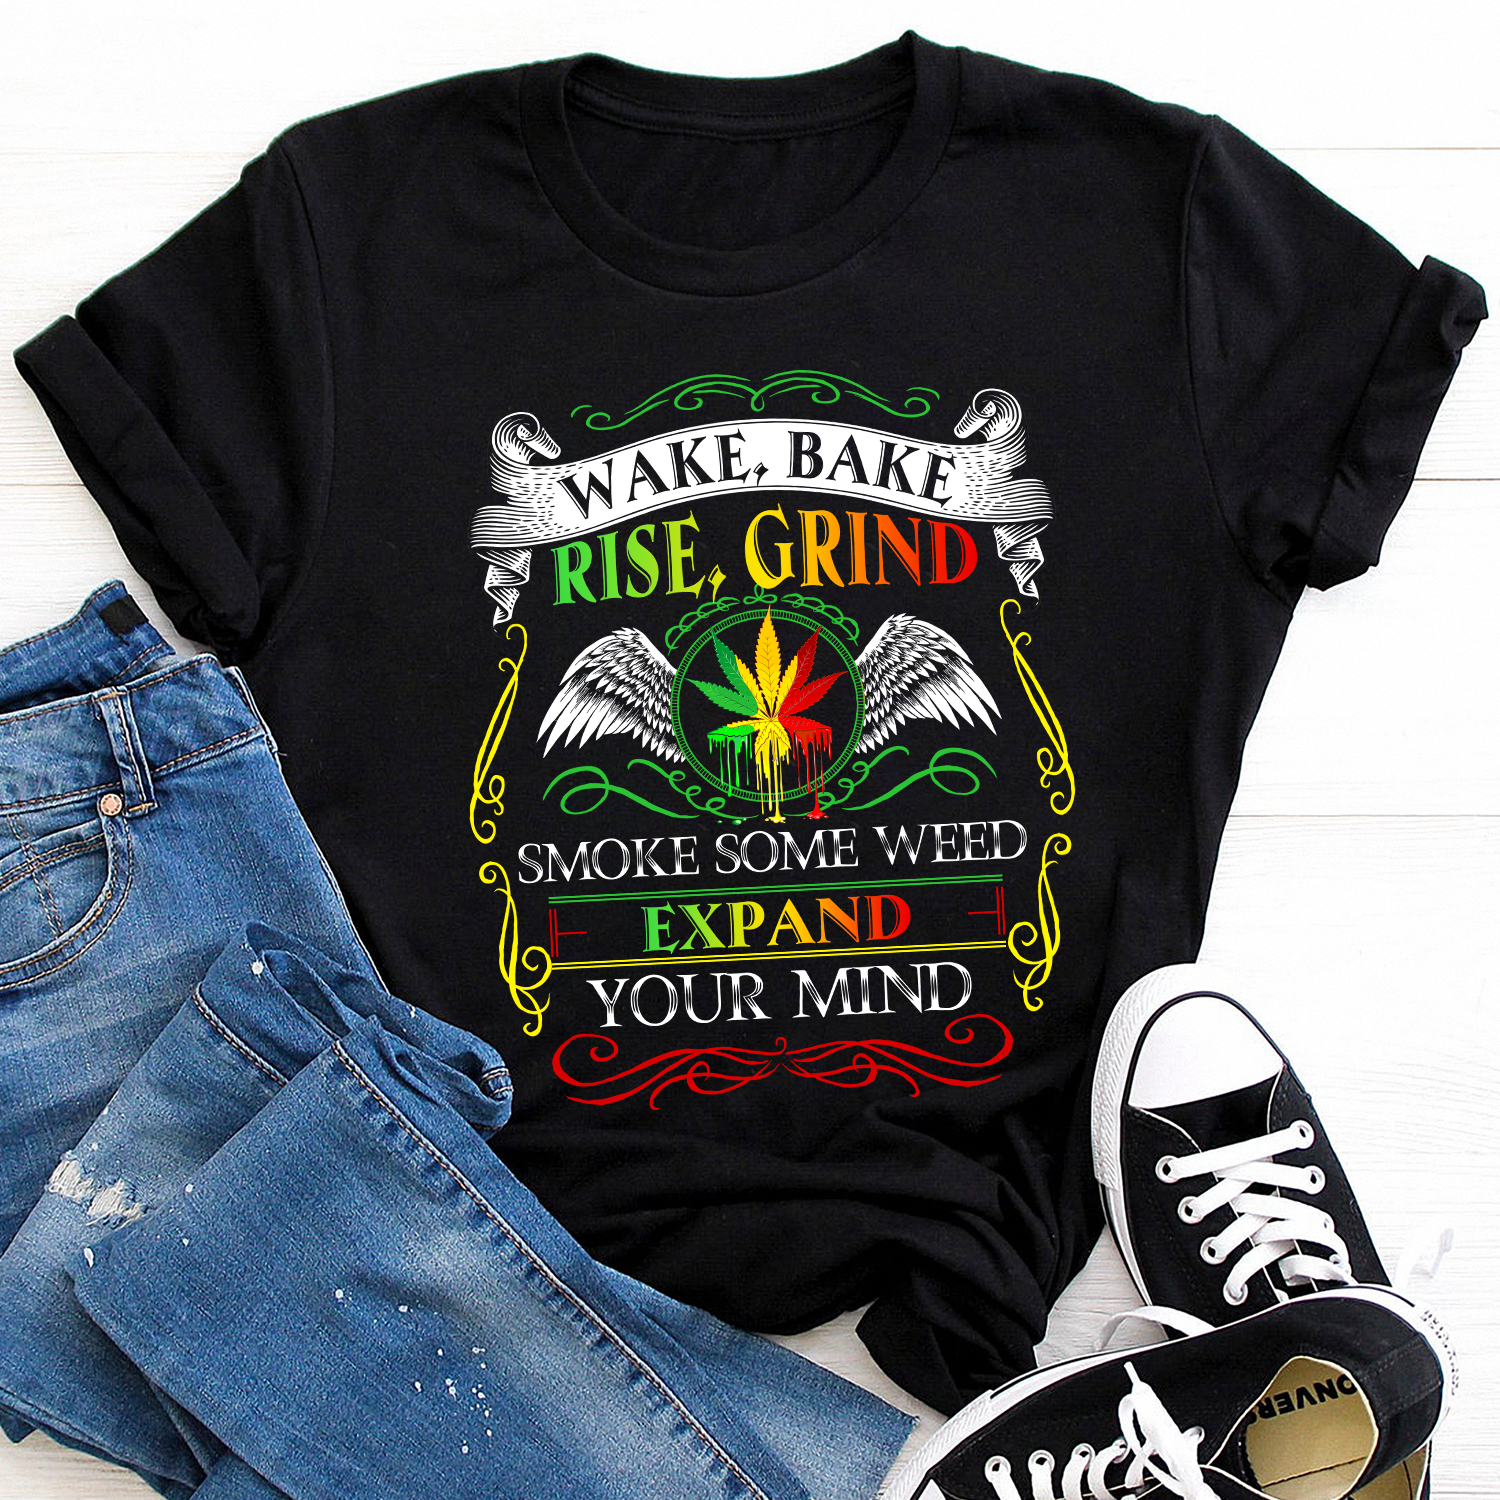 Wake Bake rise grind expand your mind Standard T-Shirt